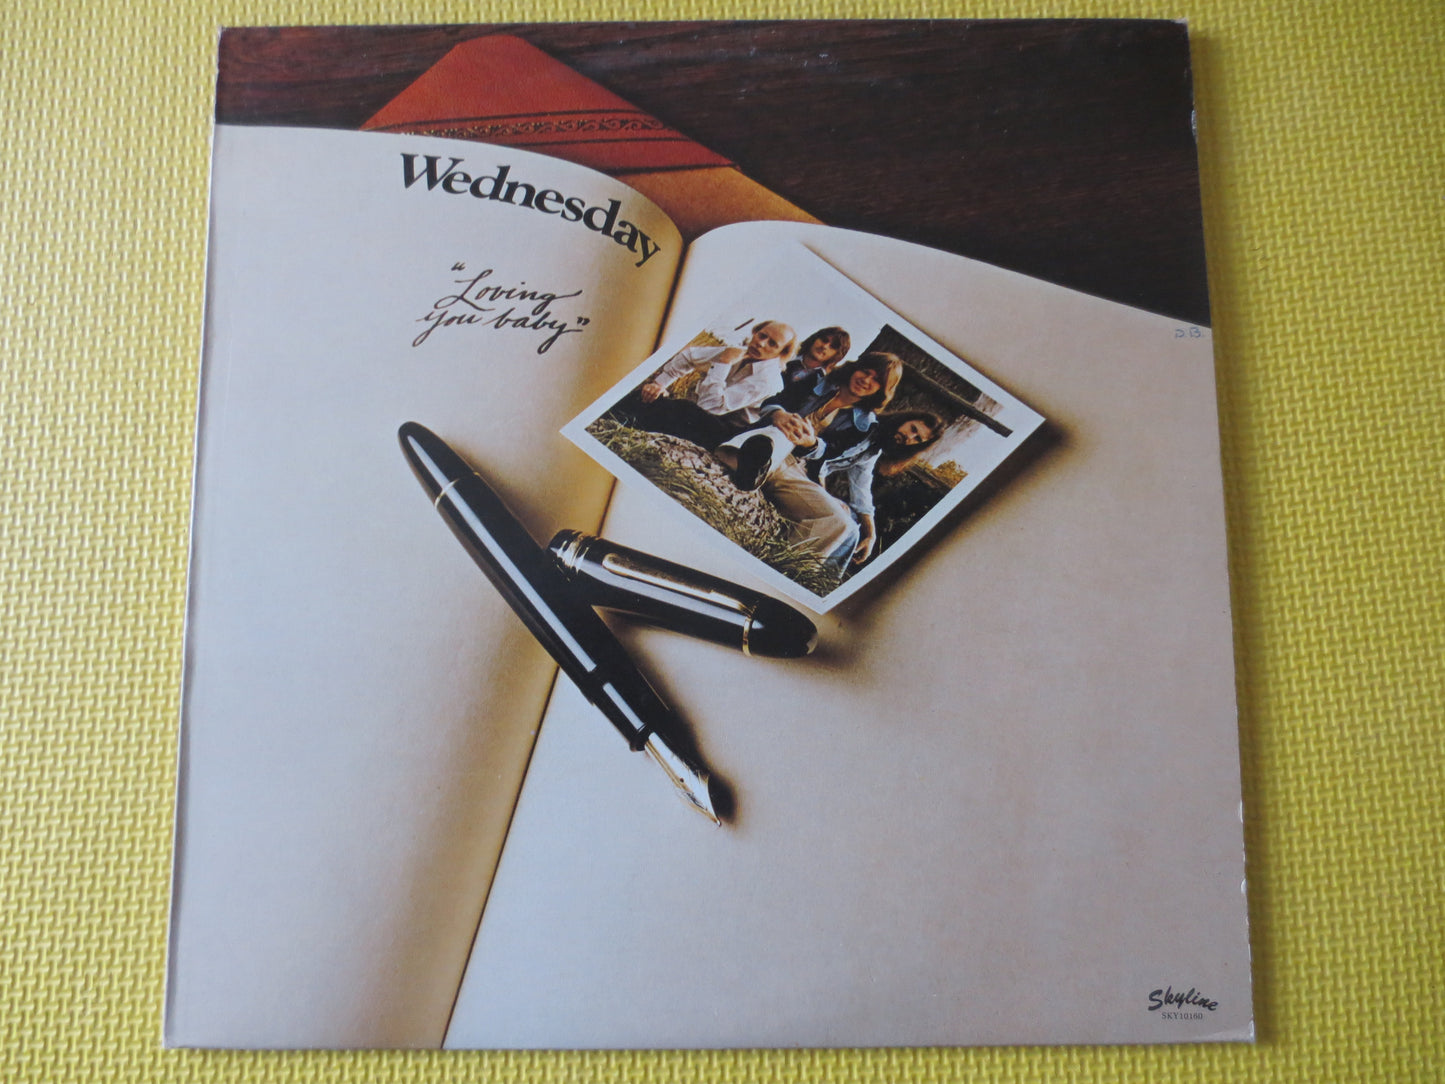 WEDNESDAY, LOVING You Baby, WEDNESDAY Albums, Wednesday Records, Wednesday Lps, Rock Records, Rock Albums, Lp, 1976 Records